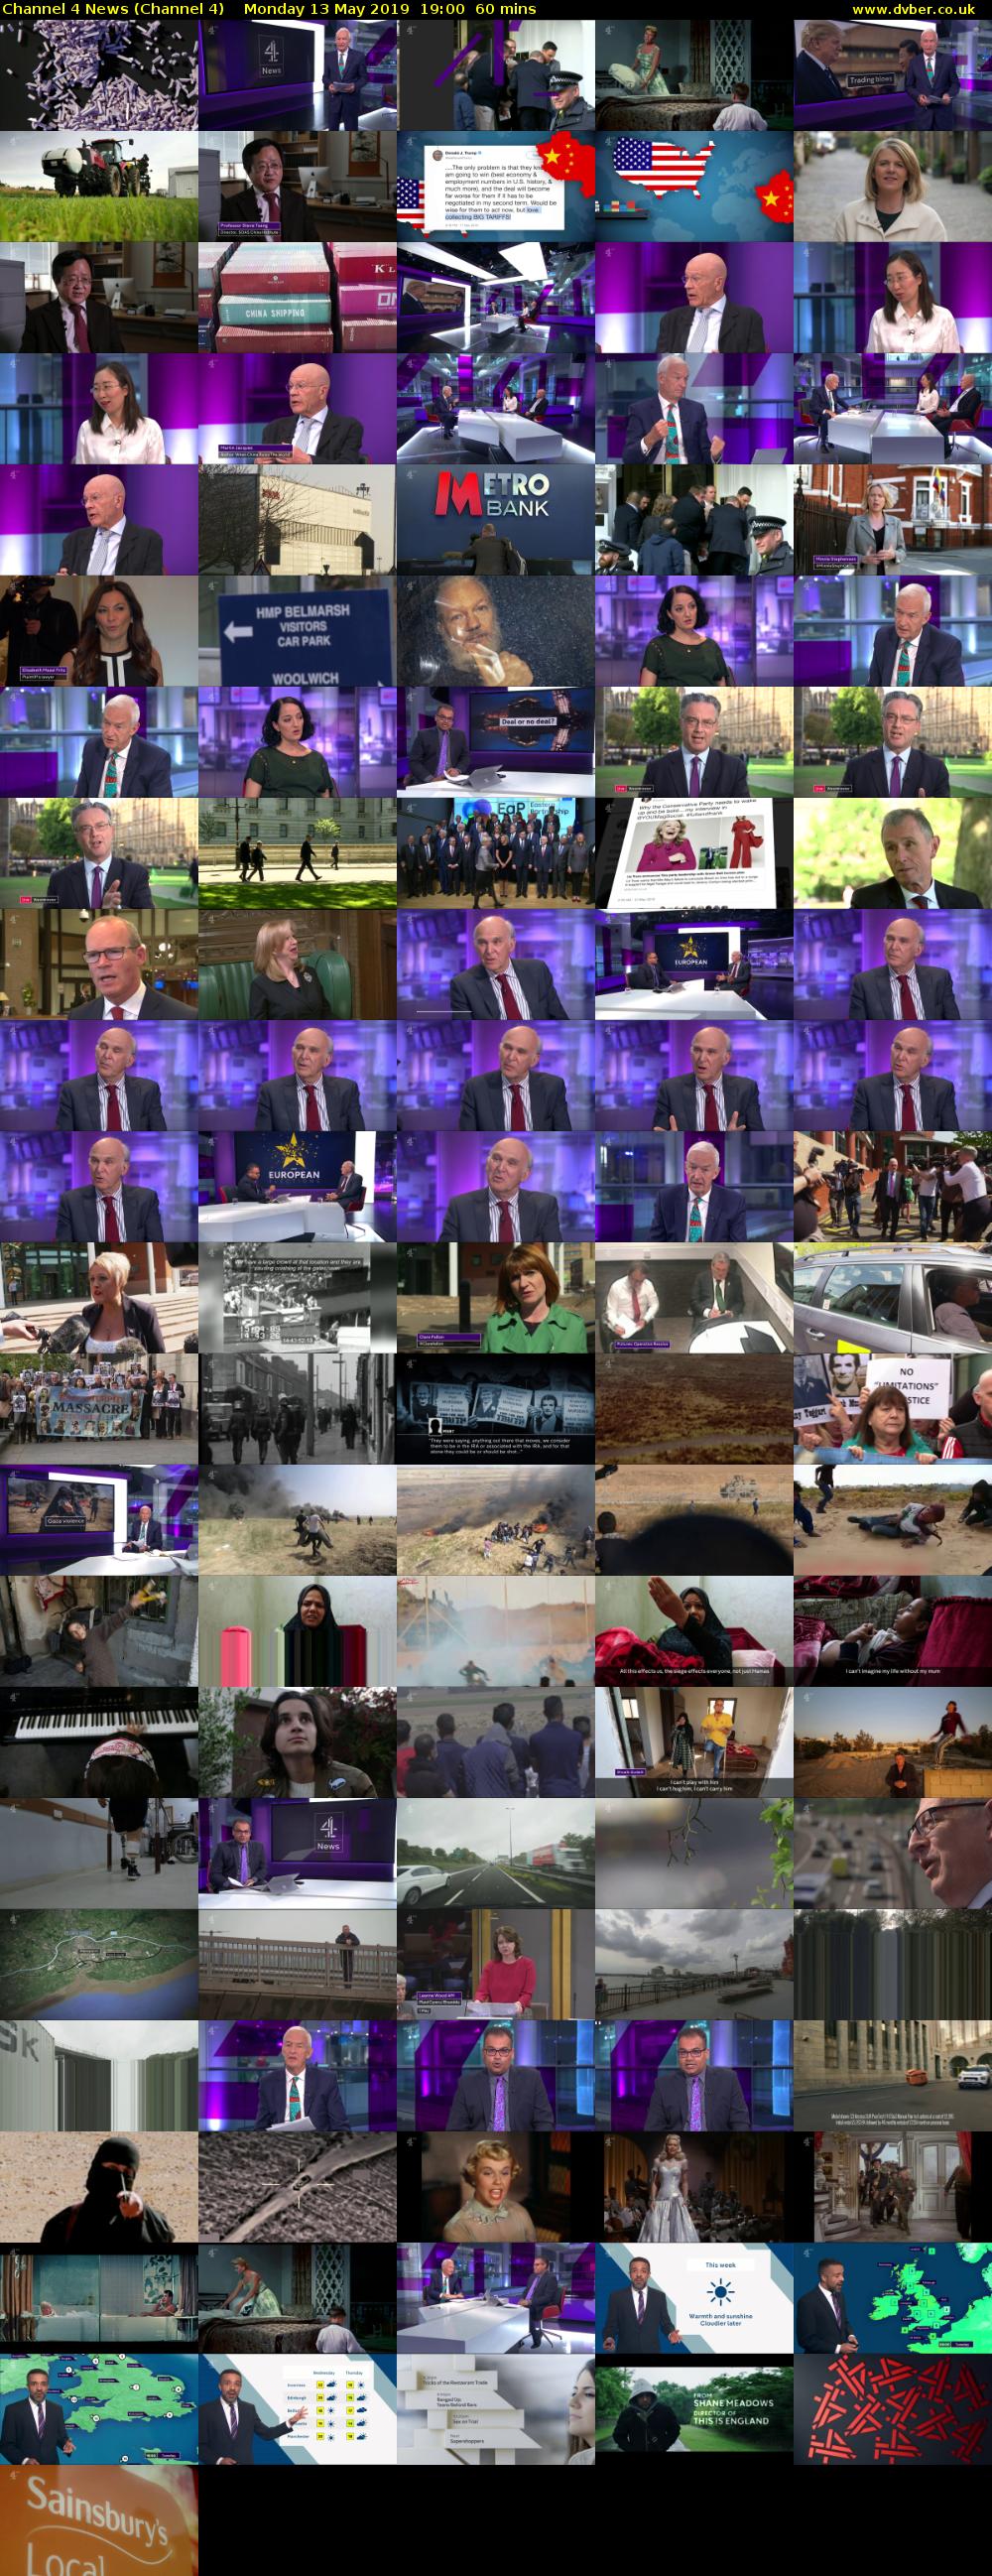 Channel 4 News (Channel 4) Monday 13 May 2019 19:00 - 20:00